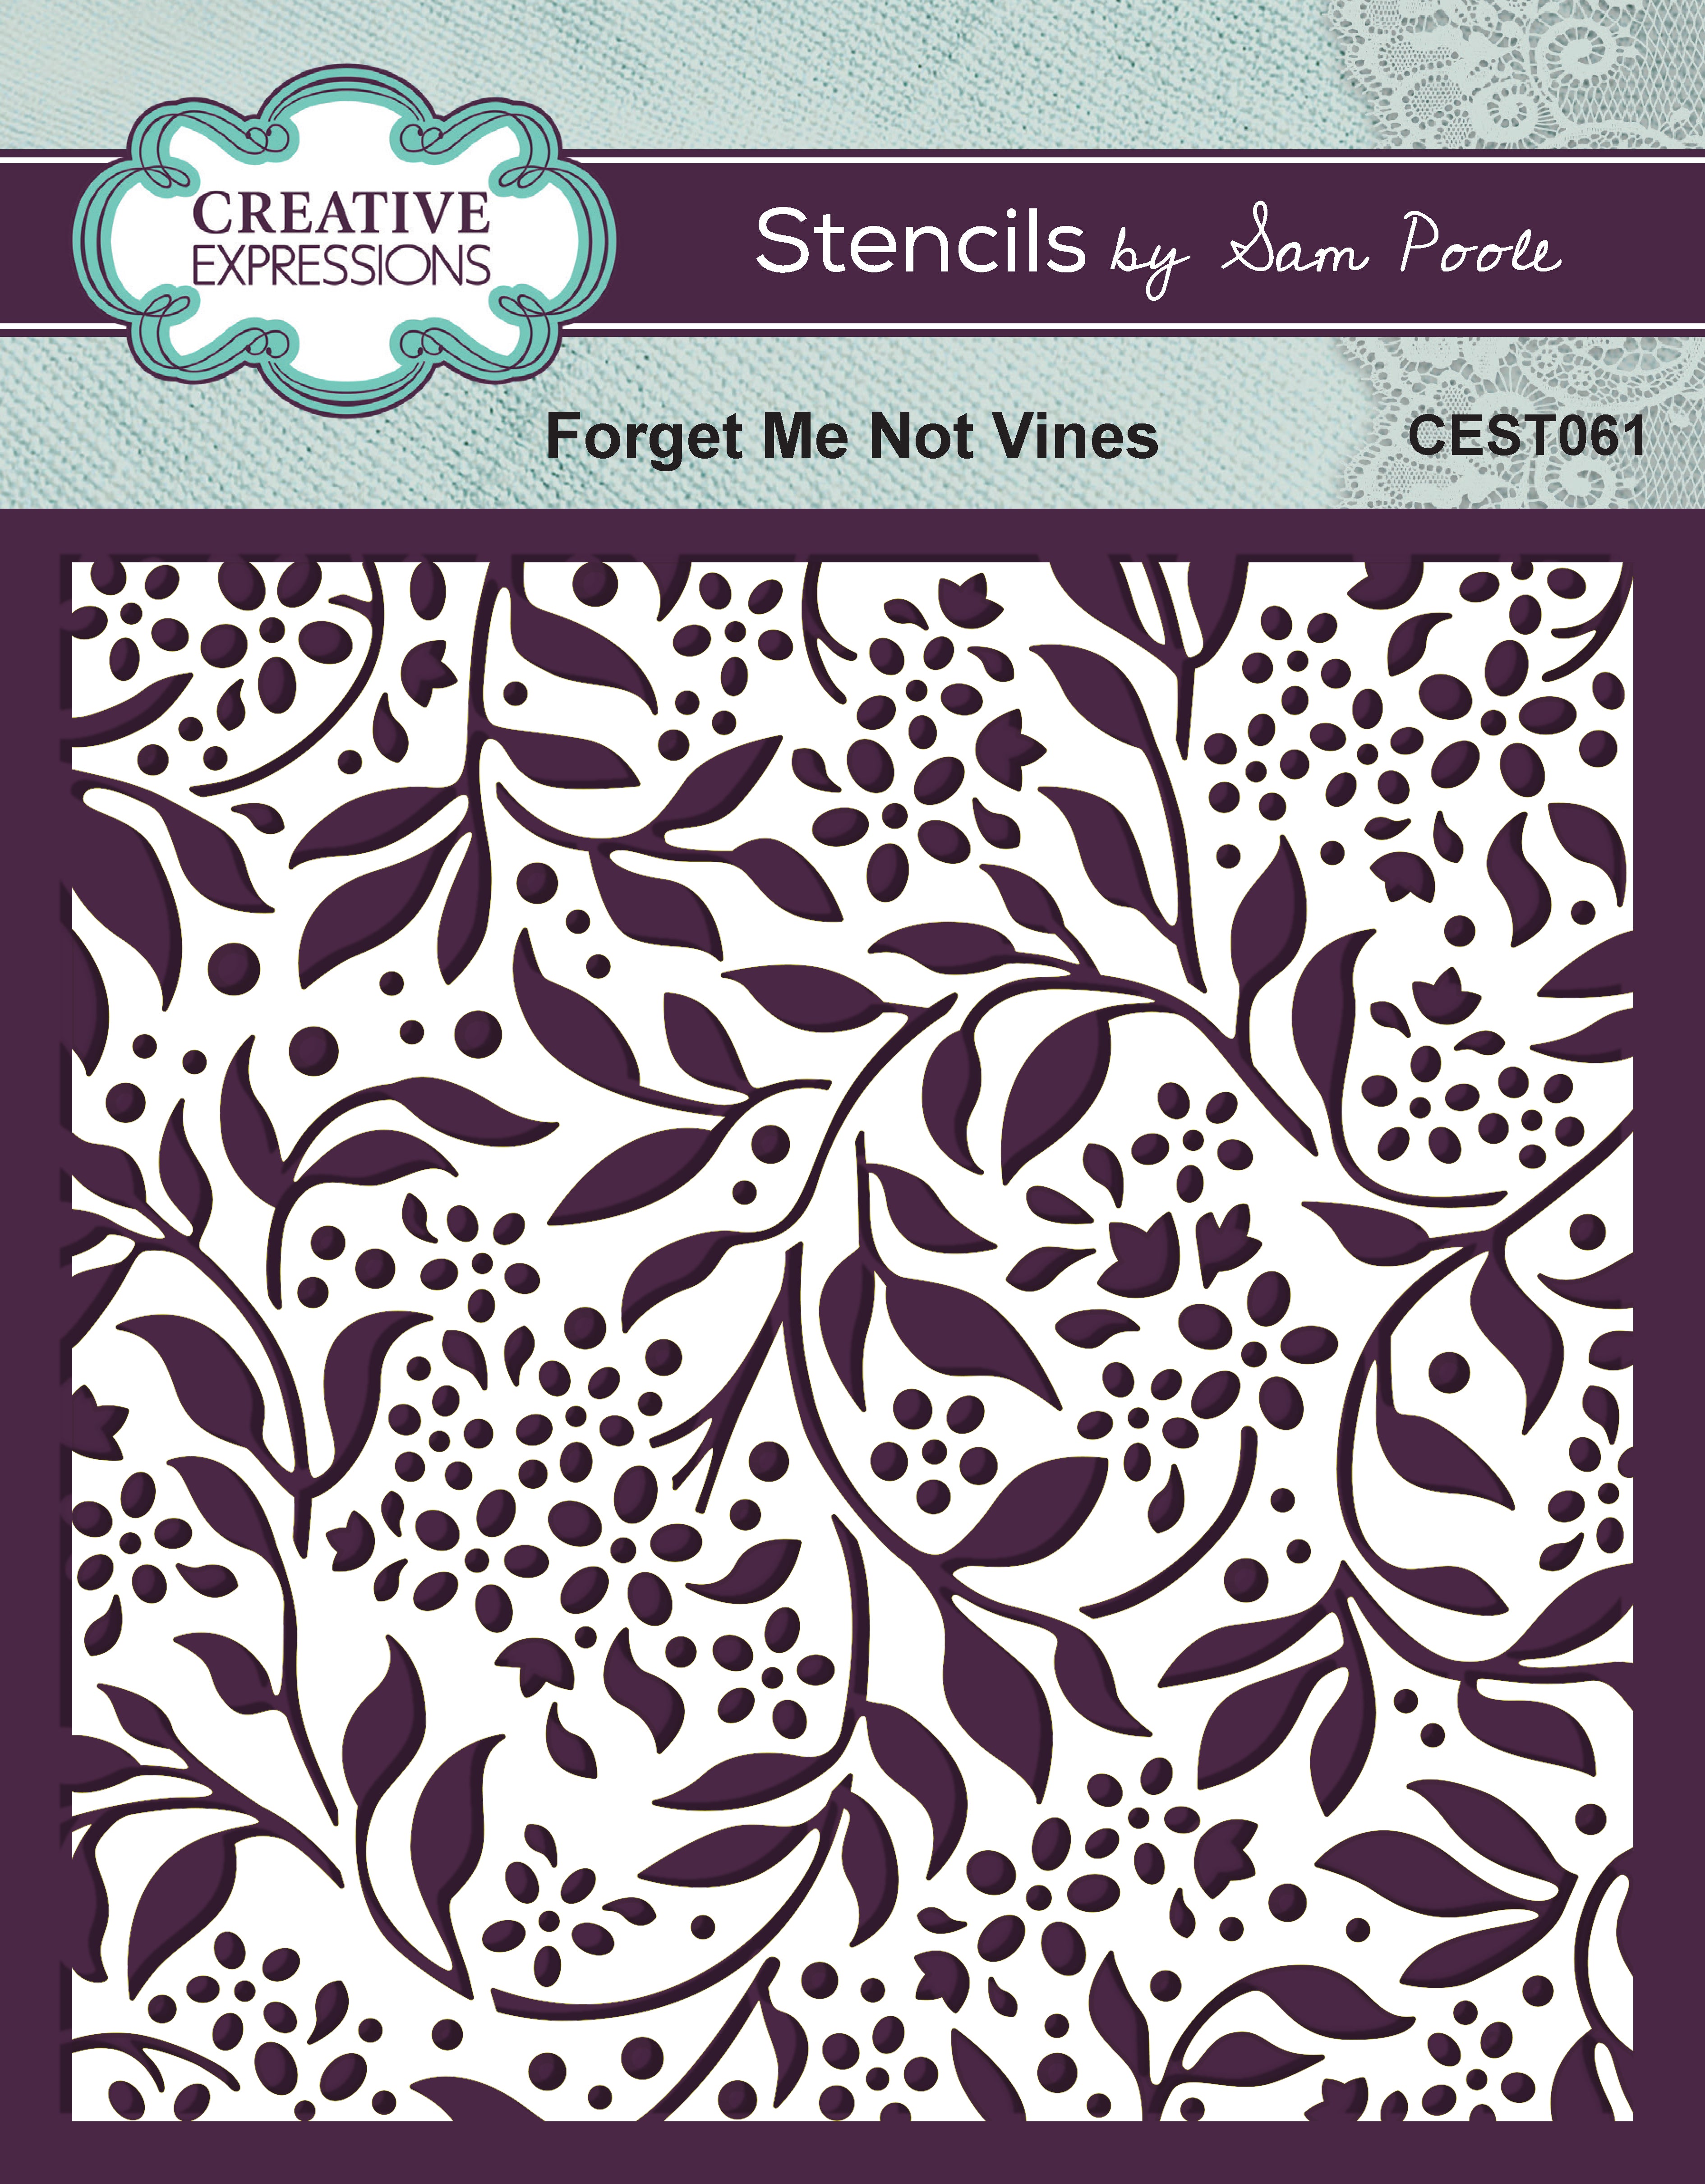 Creative Expressions Sam Poole Forget Me Not Vines 6 in x 6 in Stencil